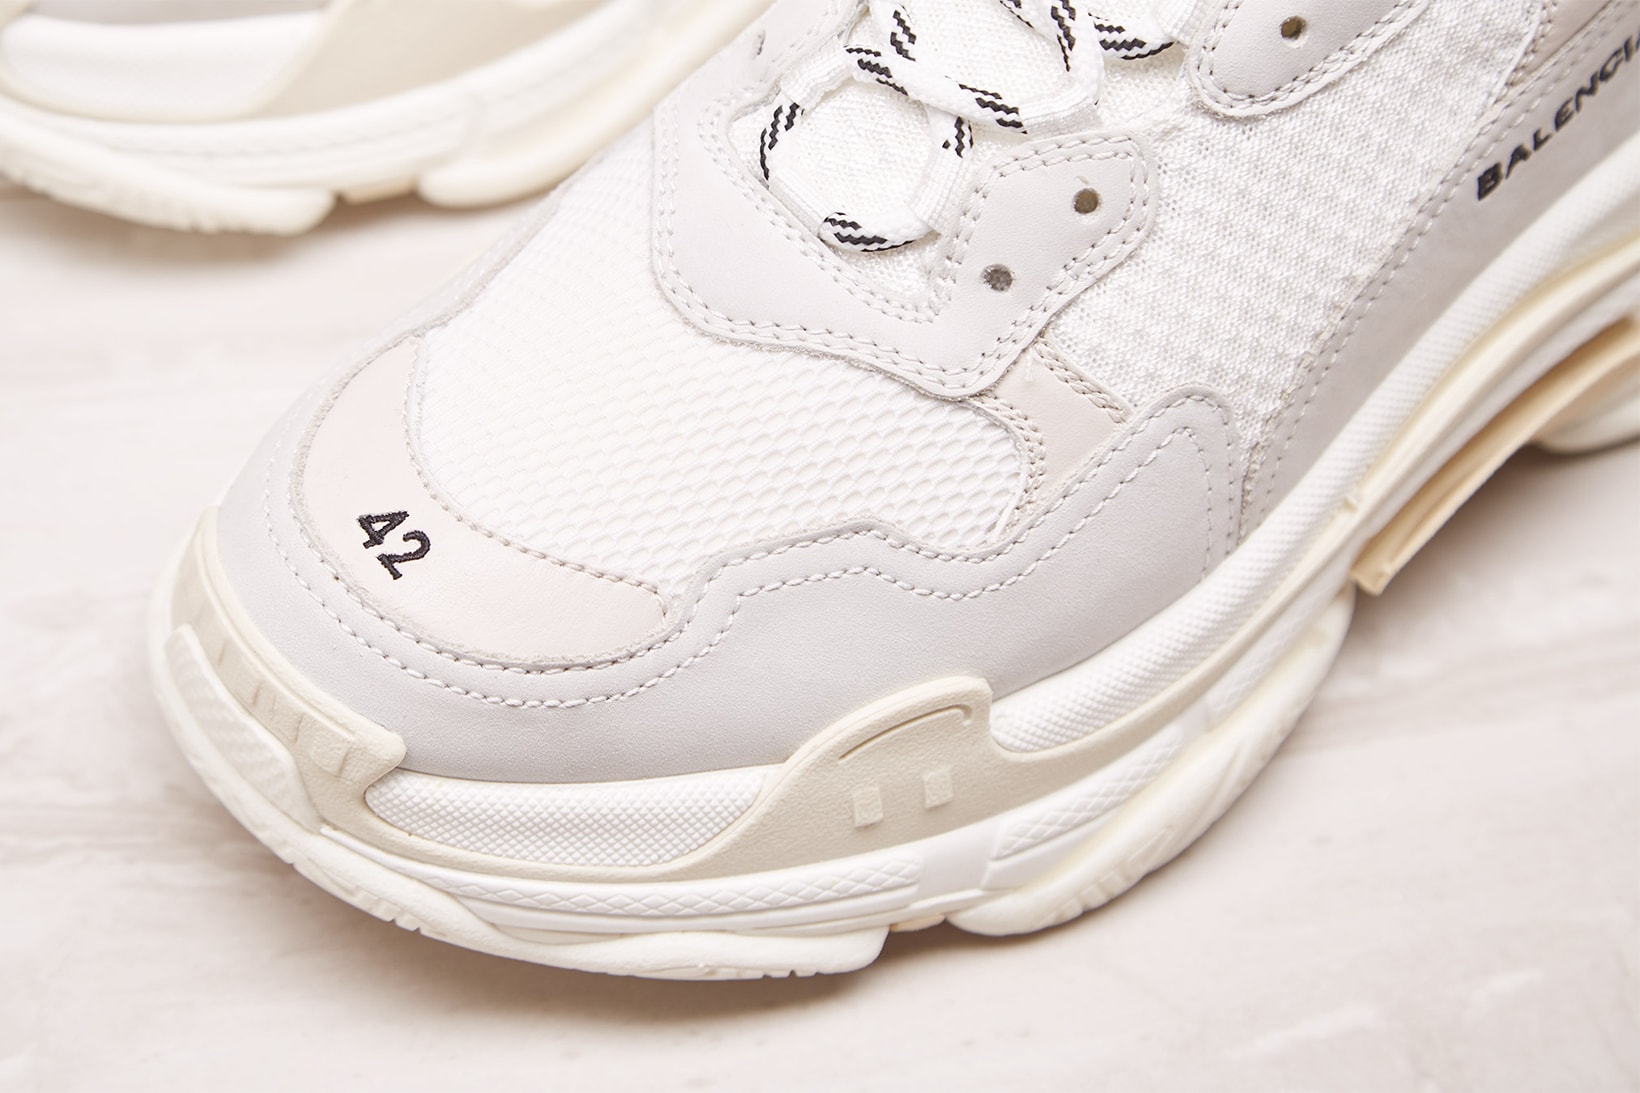 Balenciaga Triple S Cream 2017 October 30 Release Date Info Sneakers Shoes Footwear END Clothing Launches Drops Closer Look